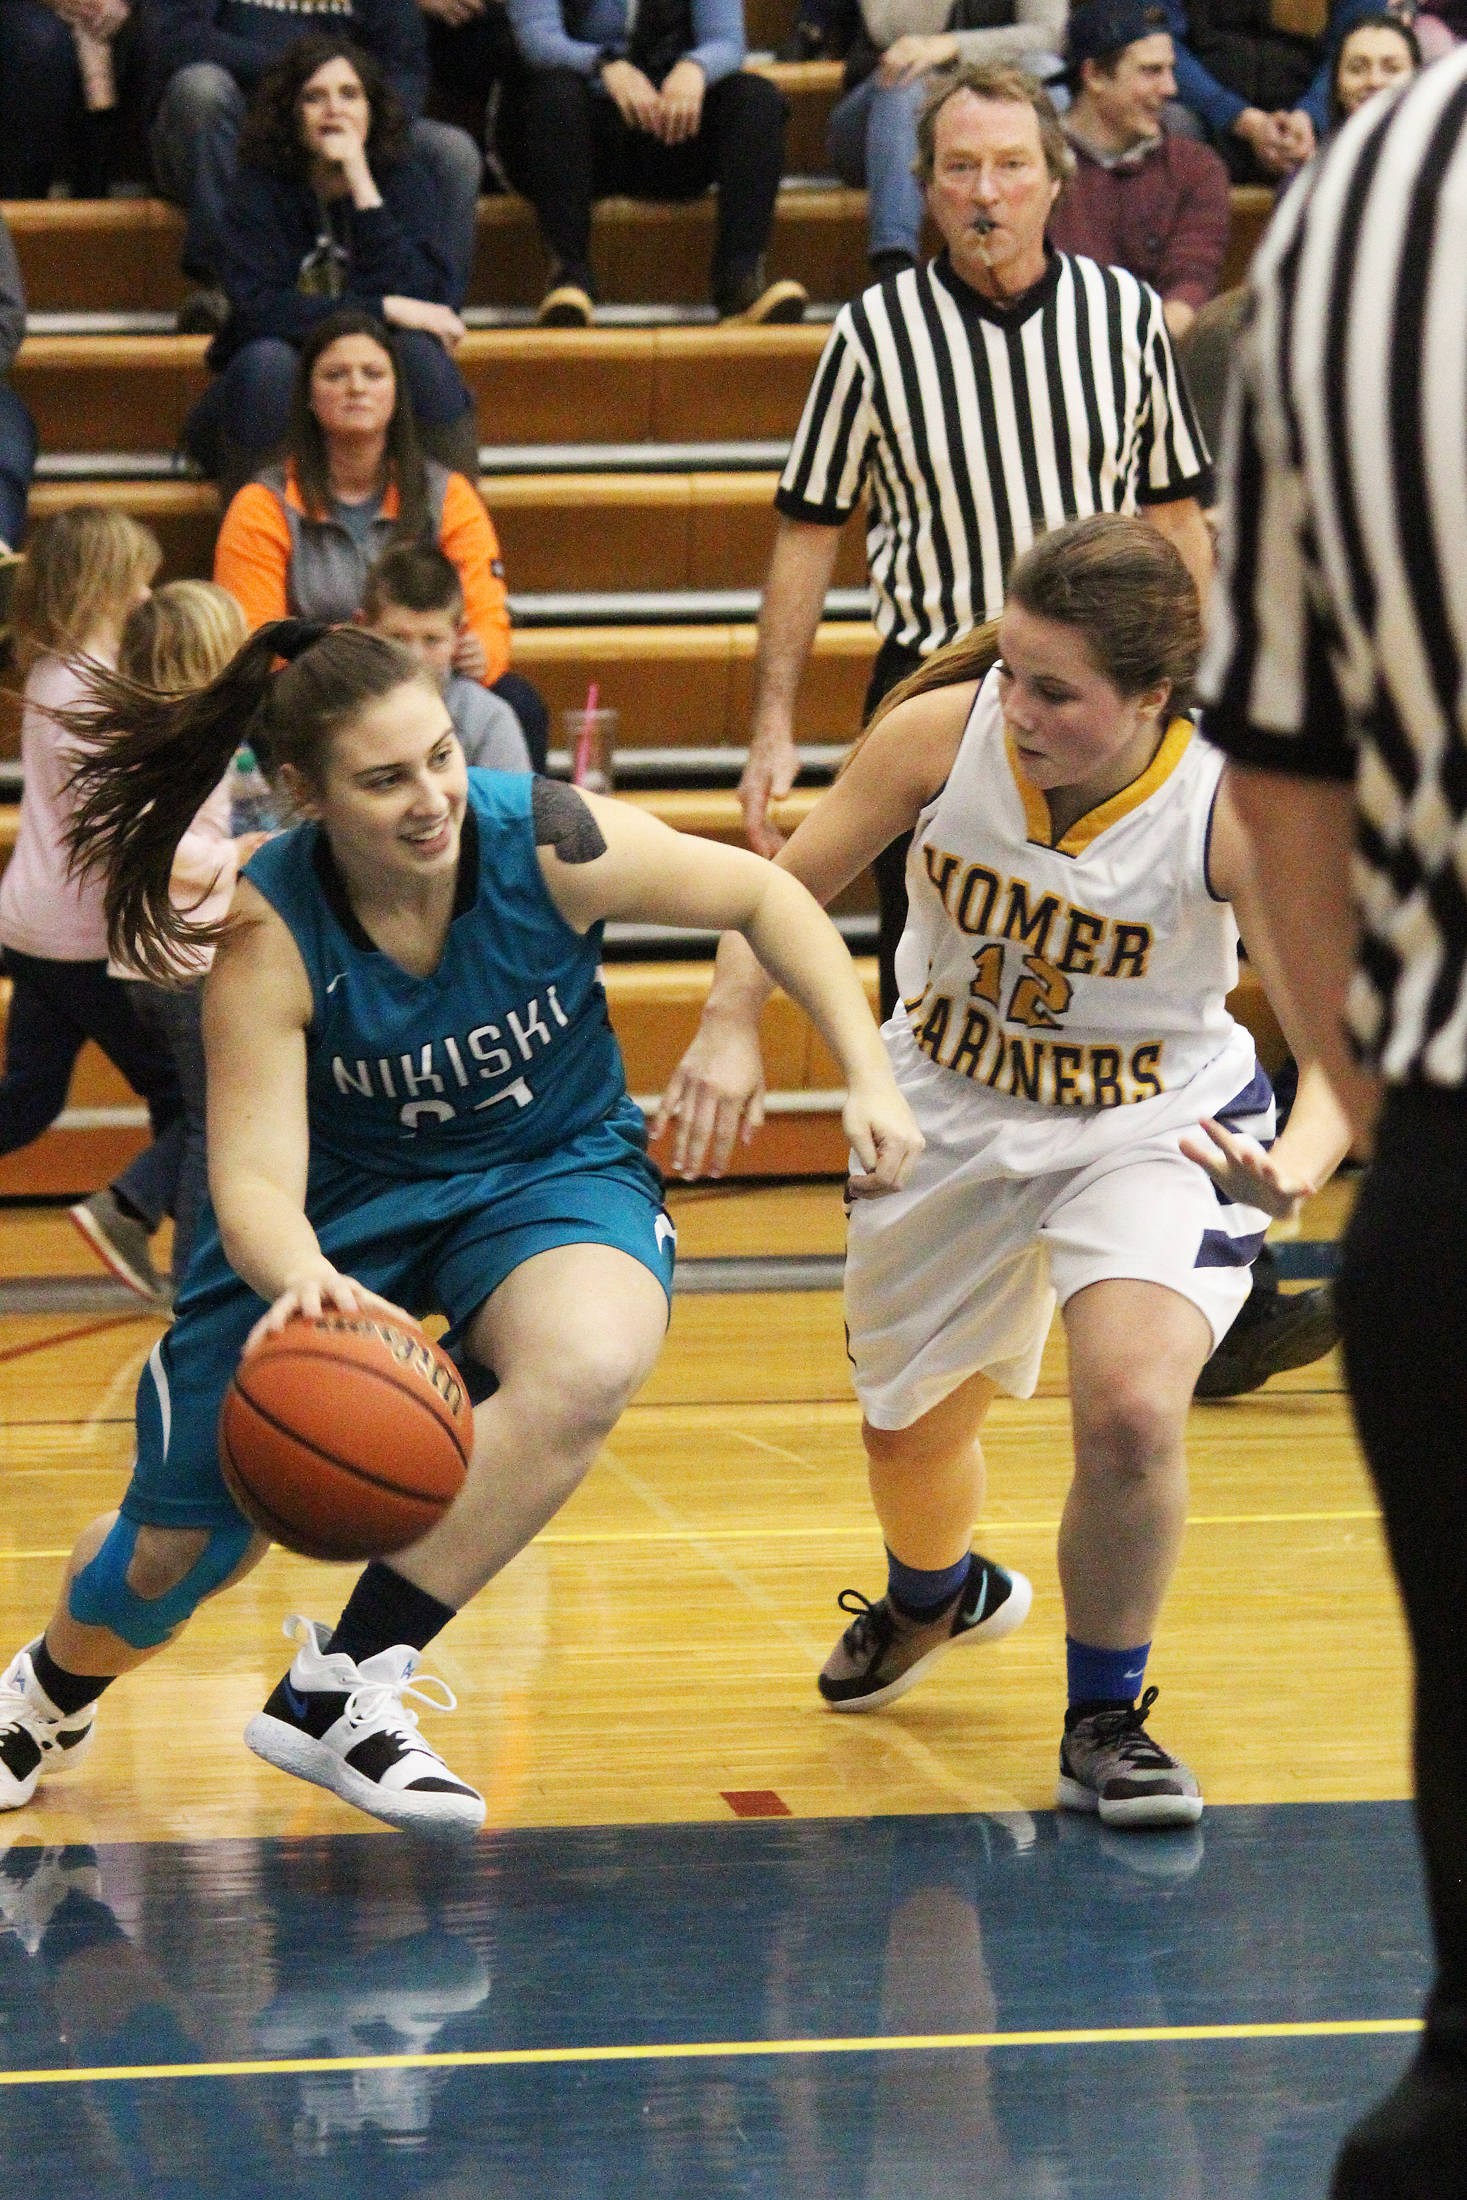 Nikiski’s Kelsey Clark looks for a way around Homer’s Rylee Doughty during a Friday, Jan. 25, 2019 matchup at the Alice Witte Gymnasium in Homer, Alaska. The Bulldogs rolled over the Lady Mariners 54-22. (Photo by Megan Pacer/Homer News)